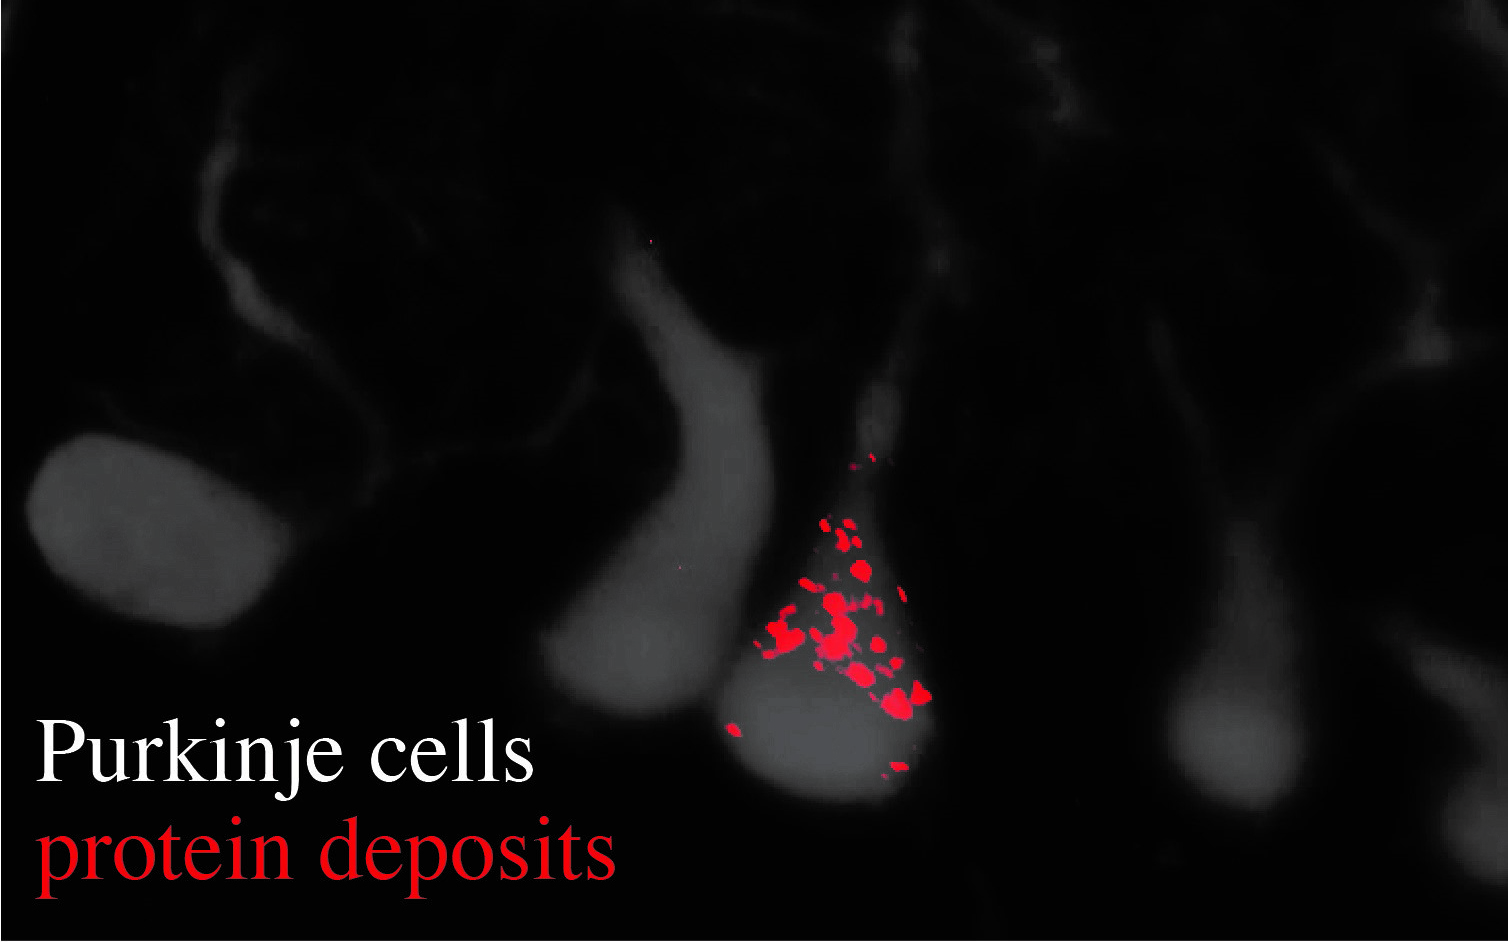 Microscopic image shows Purkinje cells and an accumulation of protein deposits.